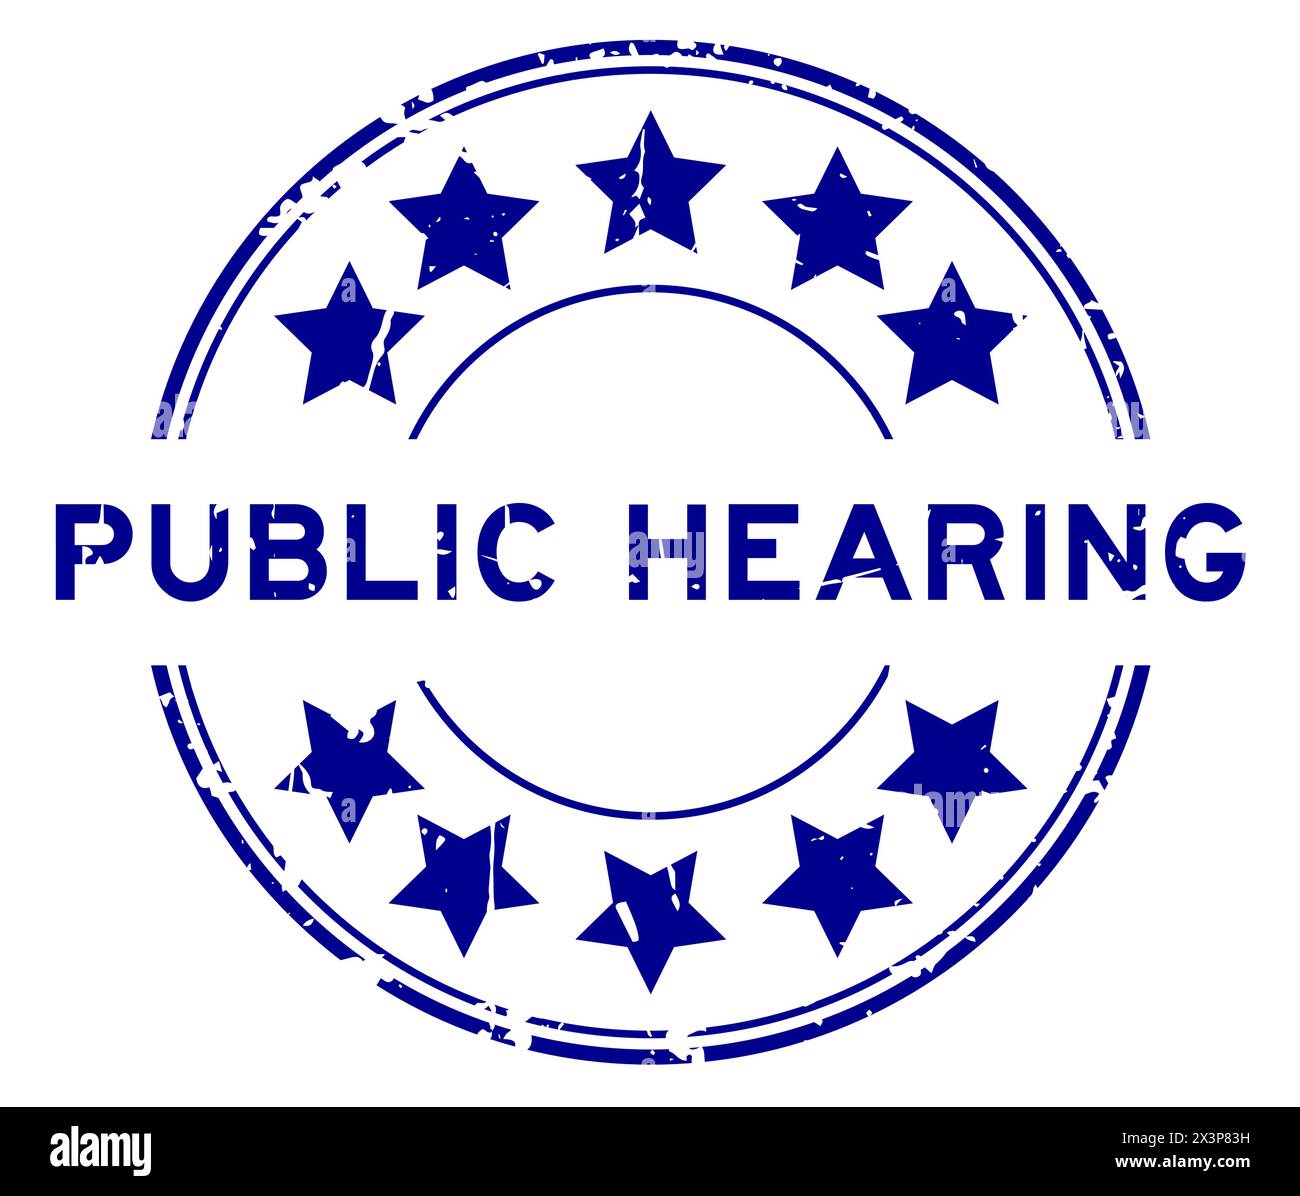 Grunge blue public hearing word with star icon round rubber seal stamp on white background Stock Vector